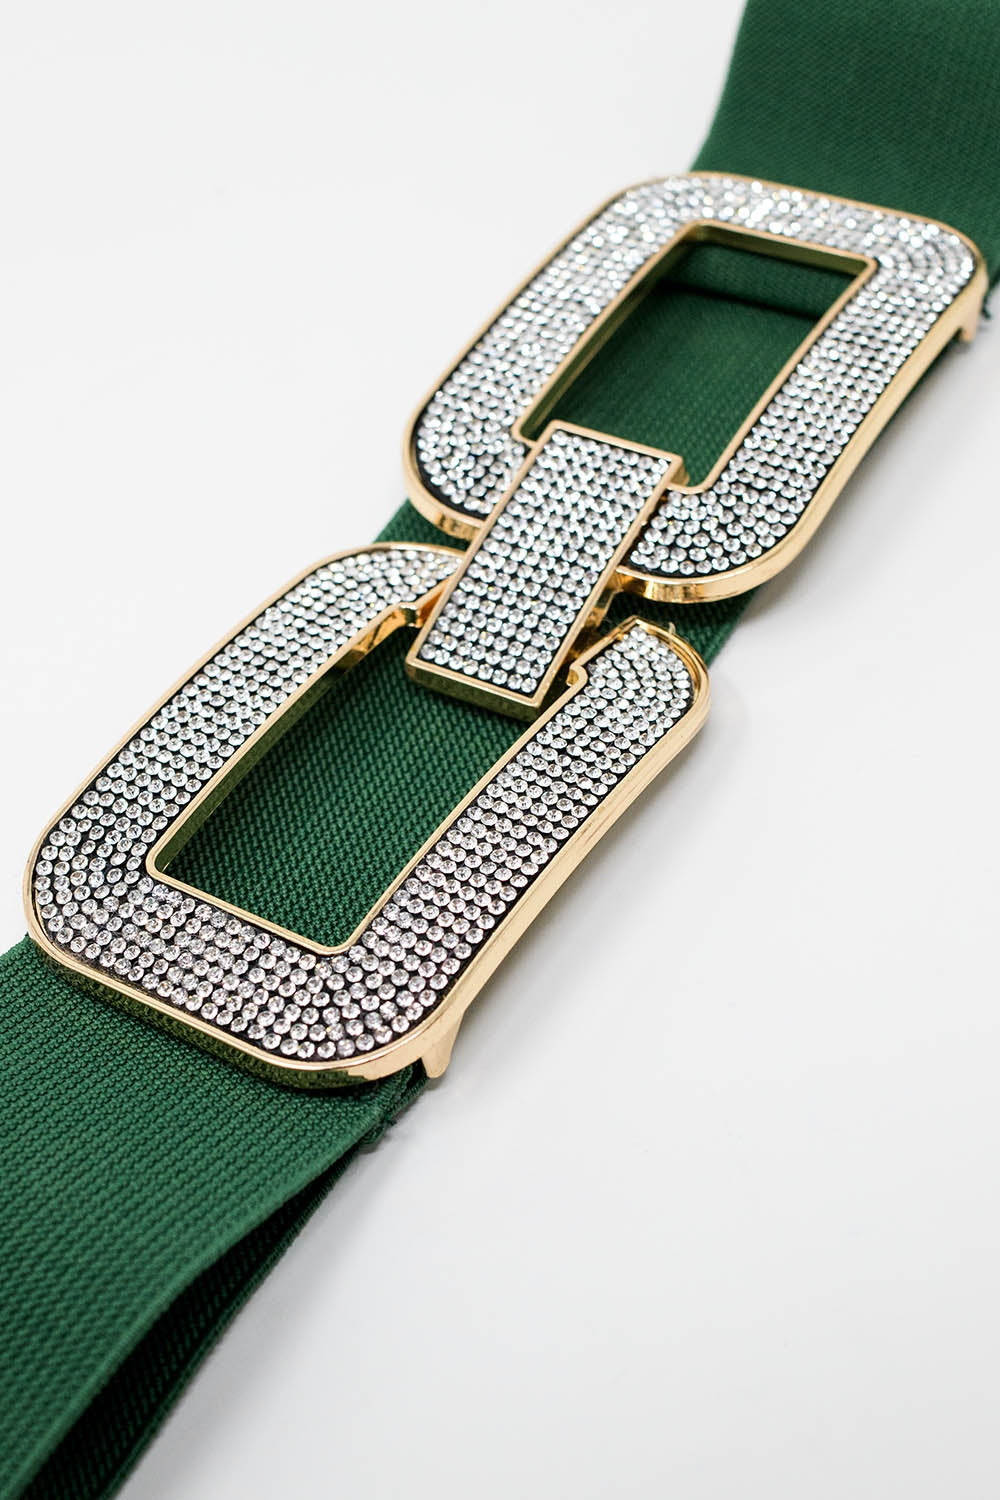 Green elastic belt with double oval buckle with rhinestone inlays